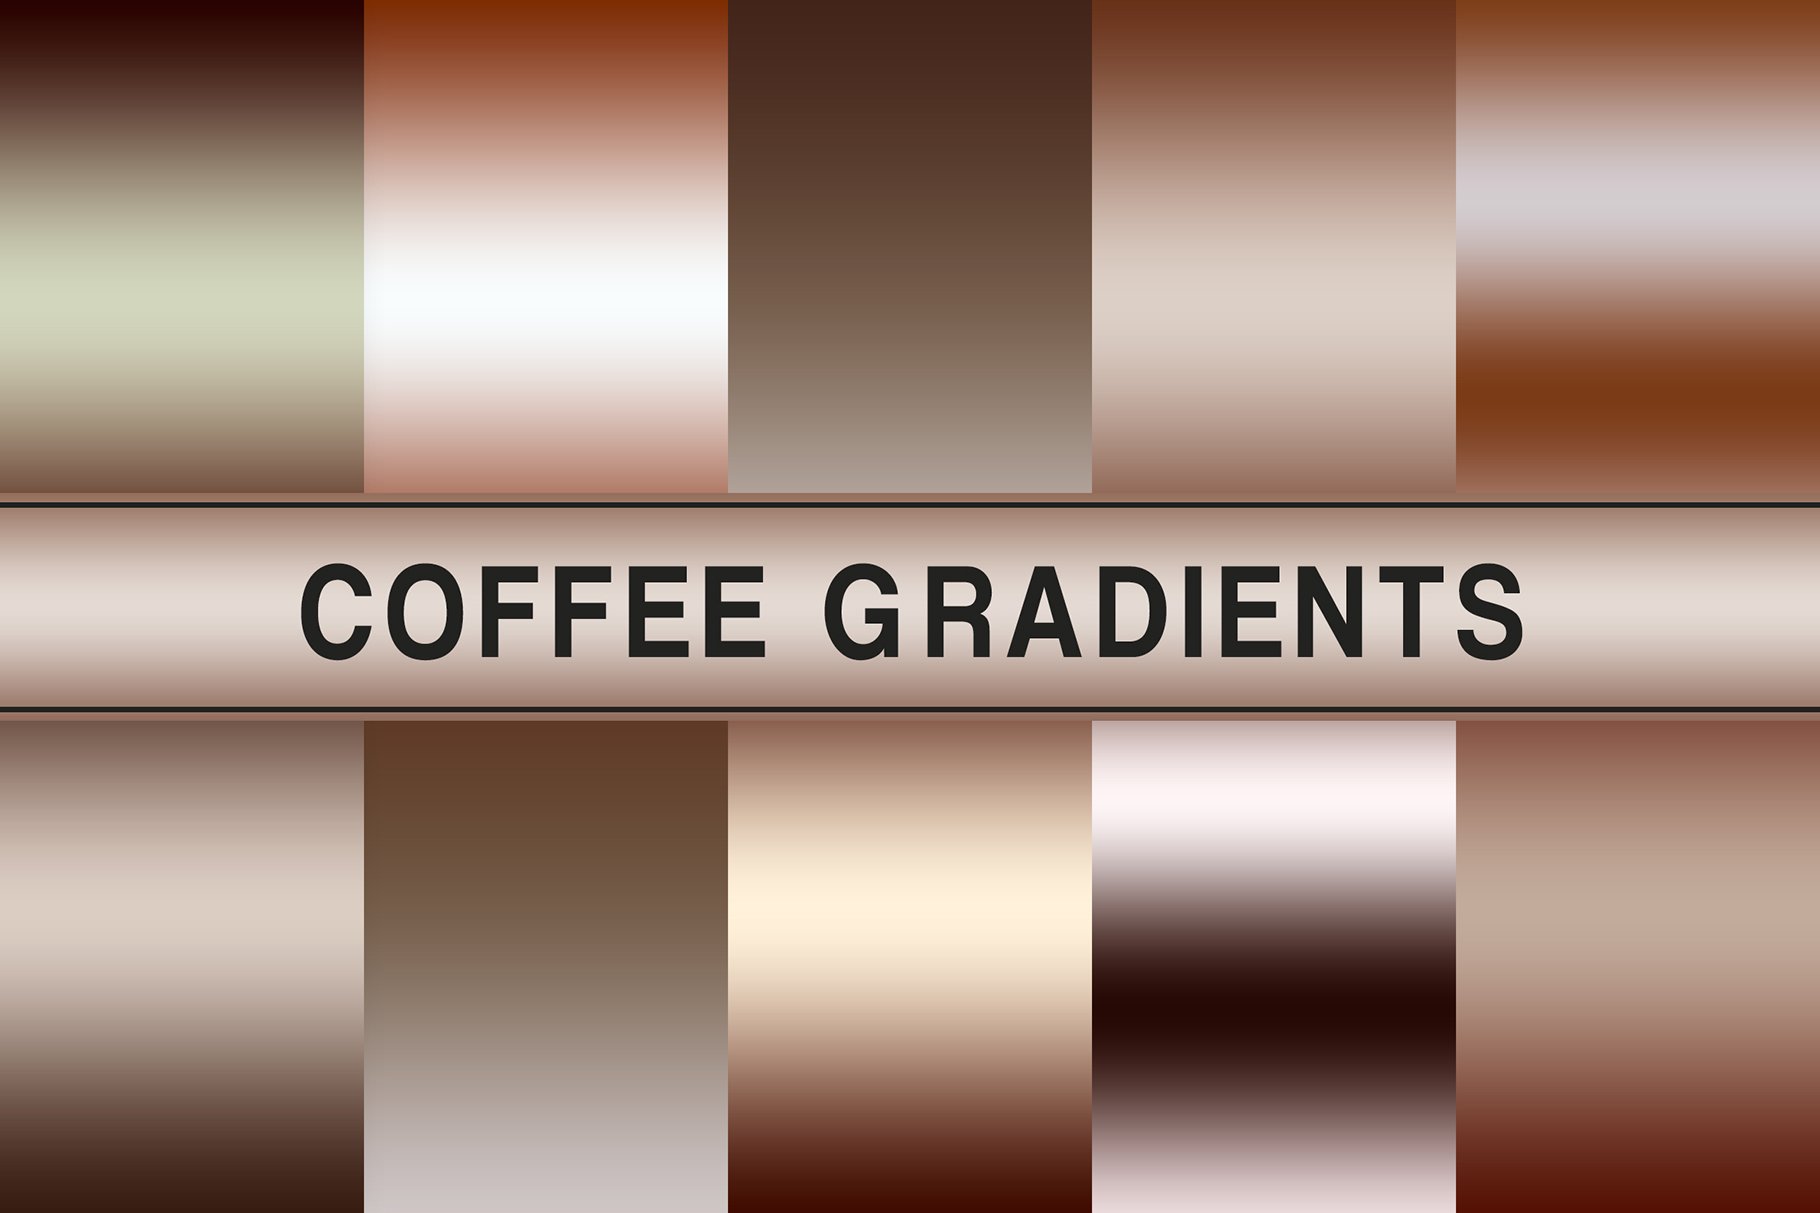 Coffee Gradients cover image.